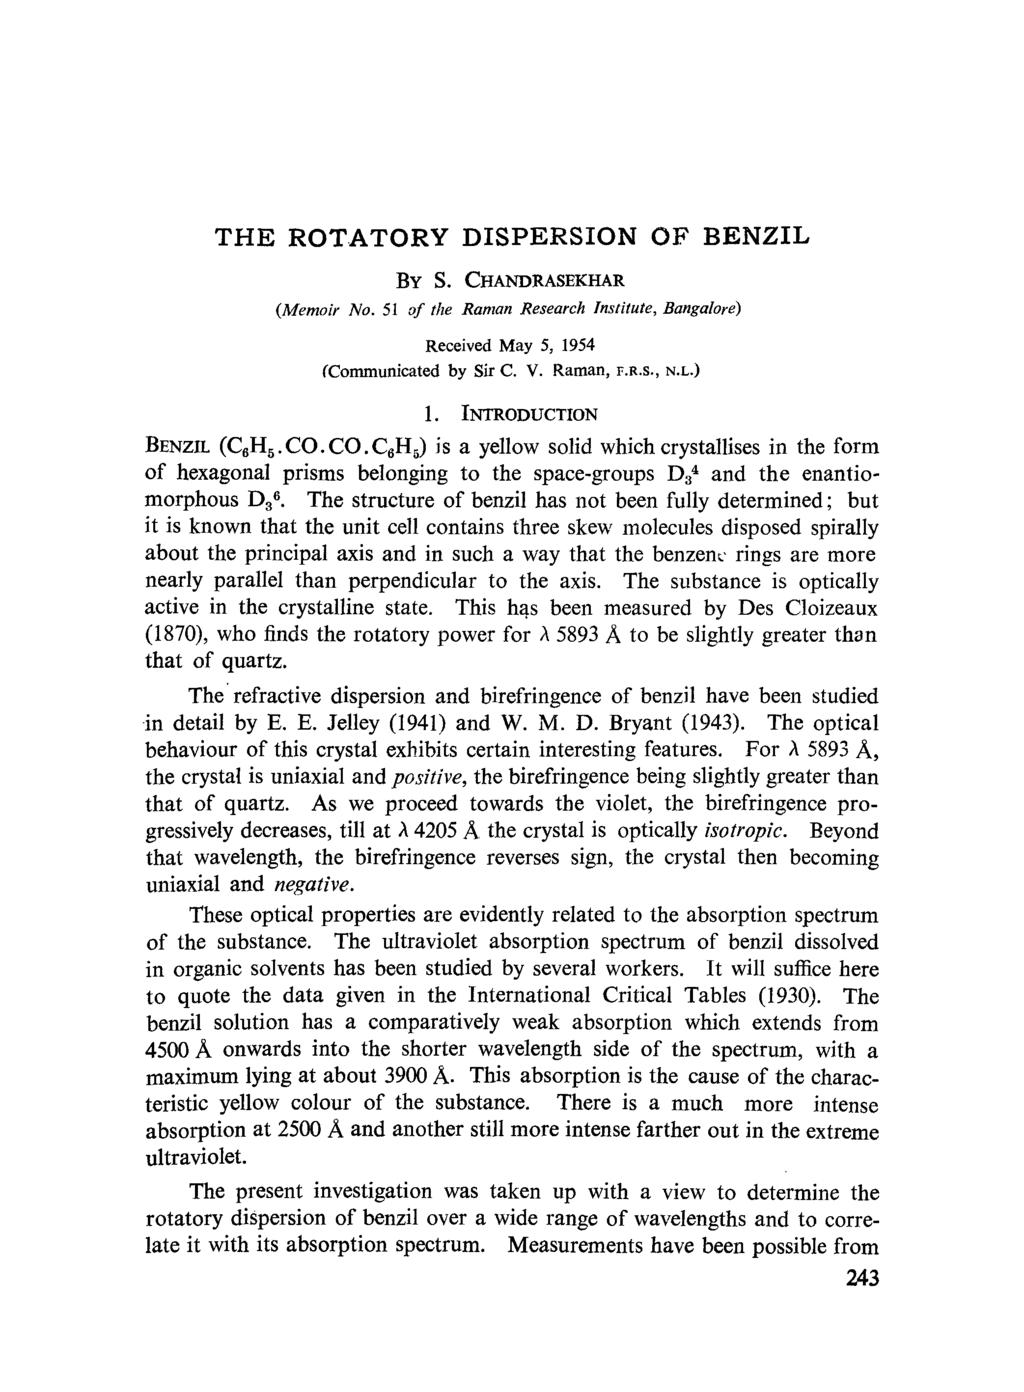 THE ROTATORY DISPERSION OF BENZIL BY S. CHANDRASEKHAR (Memoir No. 51 of the Raman Research Institute, Bangalore) Received May 5, 1954 (Communicated by Sir C. V. Raman, F.R.S., N.L.) 1.